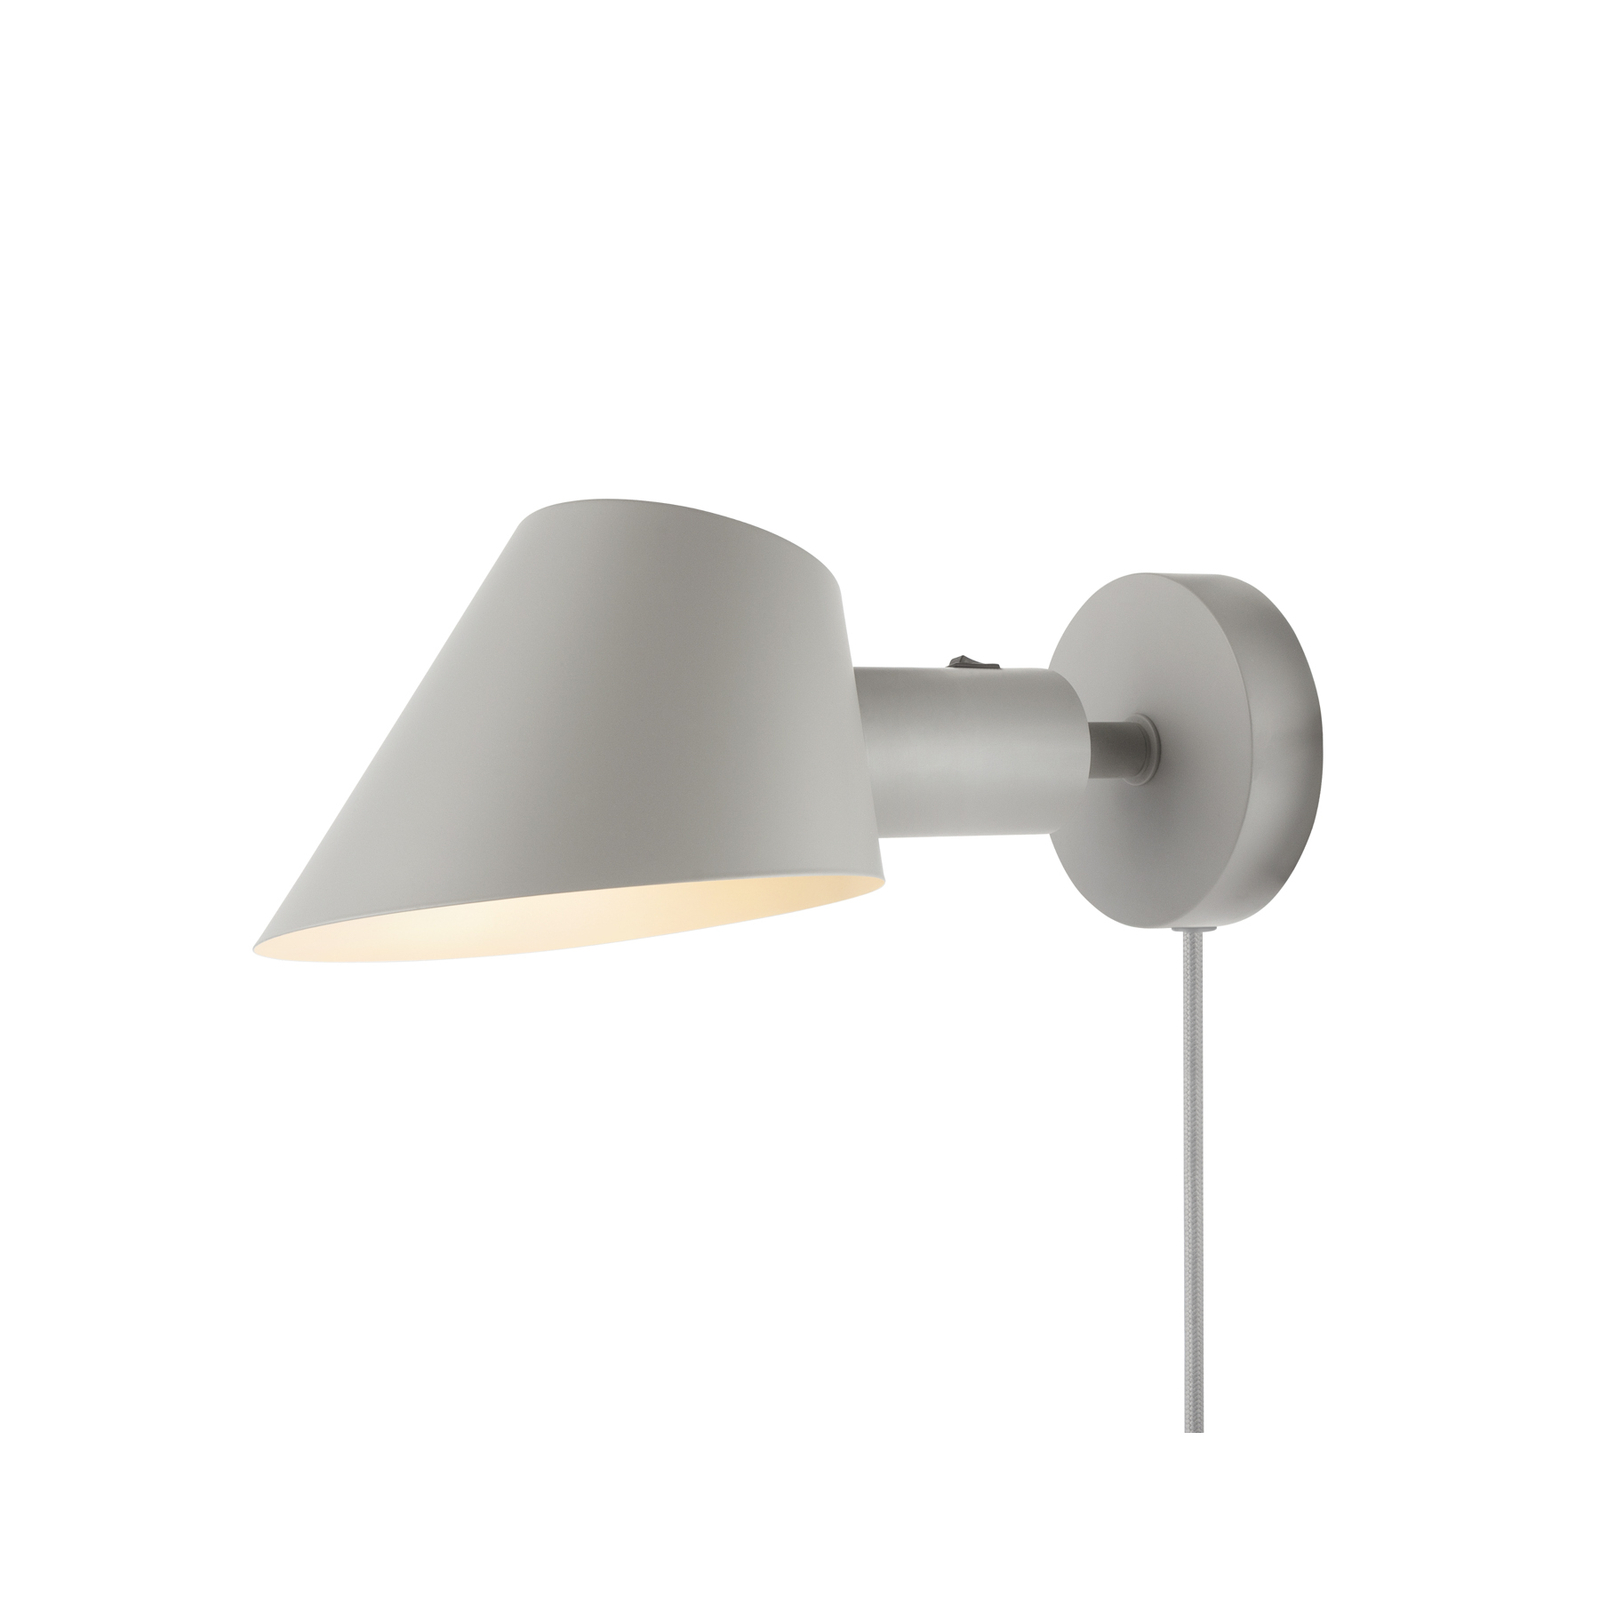 Stay Short wall light with a plug, grey